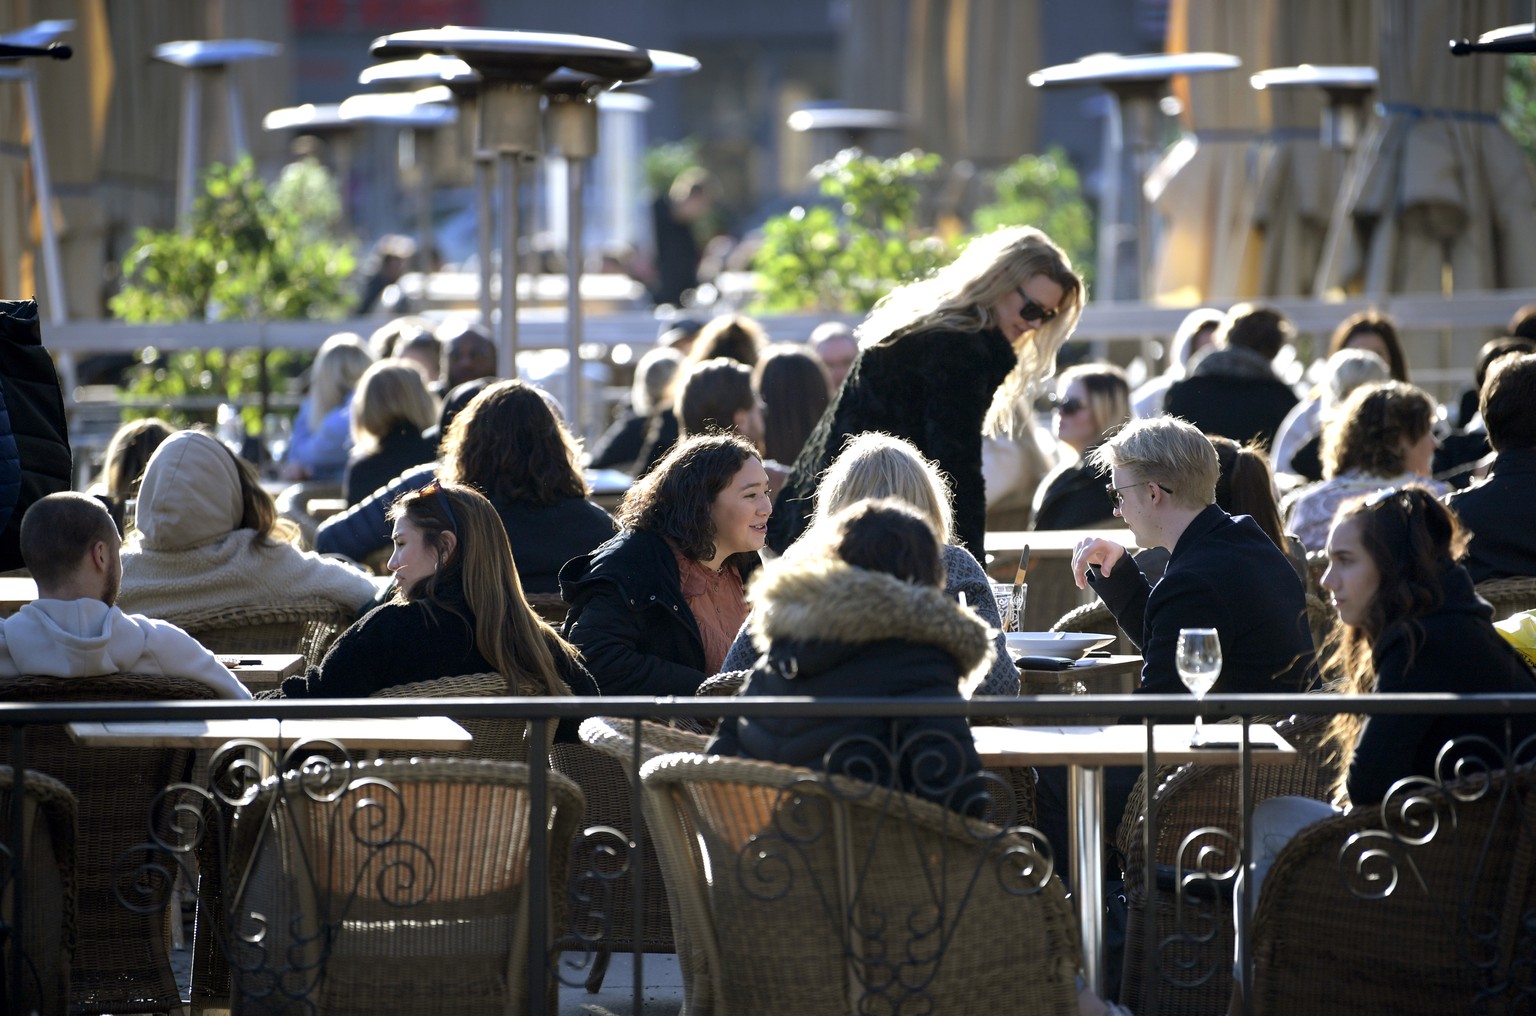 epa08324734 People sit at an outdoor restaurant at a square in central Stockholm, Sweden, 26 March 2020. Despite the coronavirus outbreak around the world, people gather to enjoy the sun. EPA/Janerik  ...